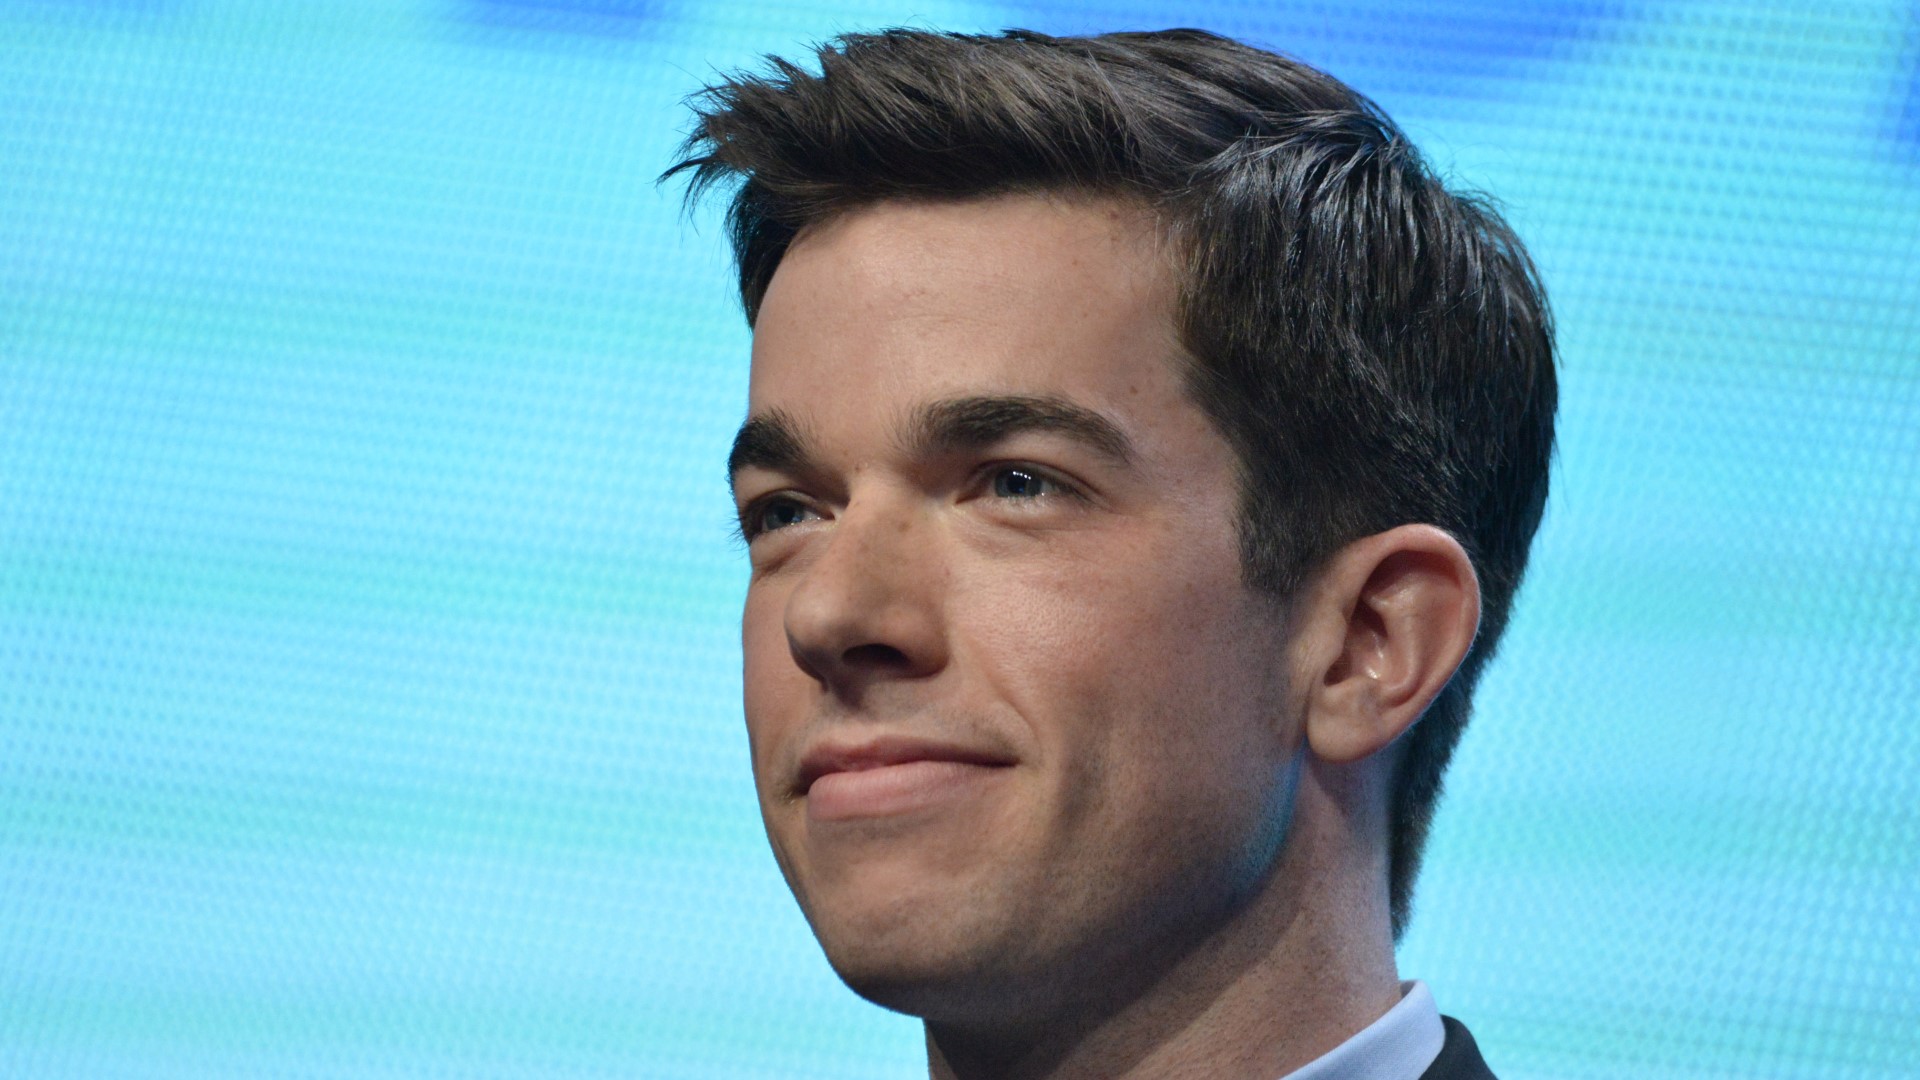 Mulaney, famously known for his SNL segments is coming to Auburn this Saturday. #k5evening